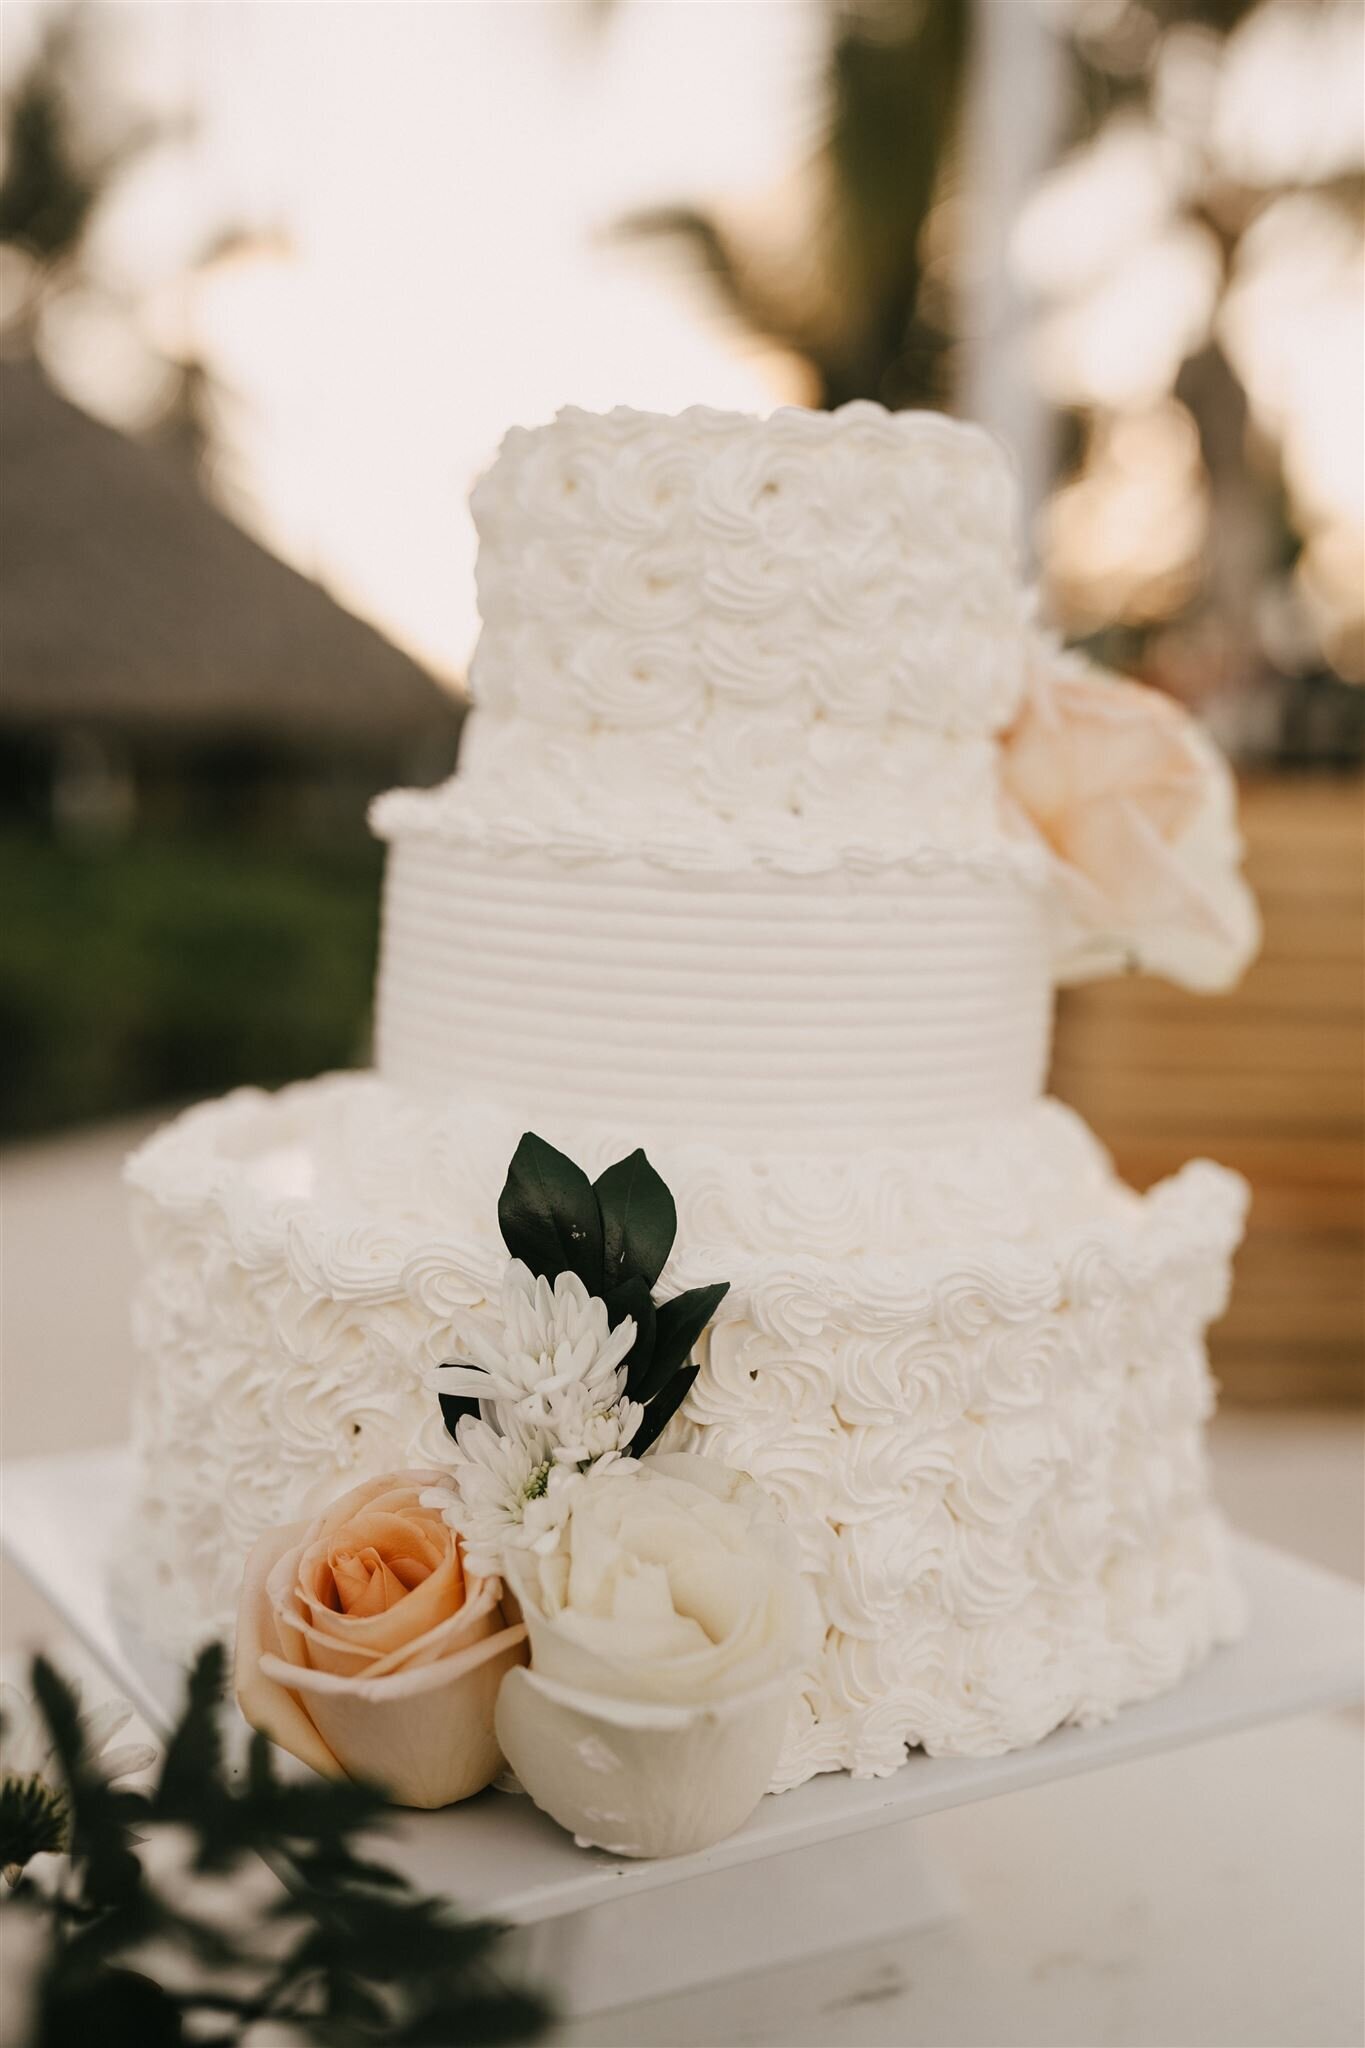 A detail photo of wedding cake on beach in Punta Cana, Dominican